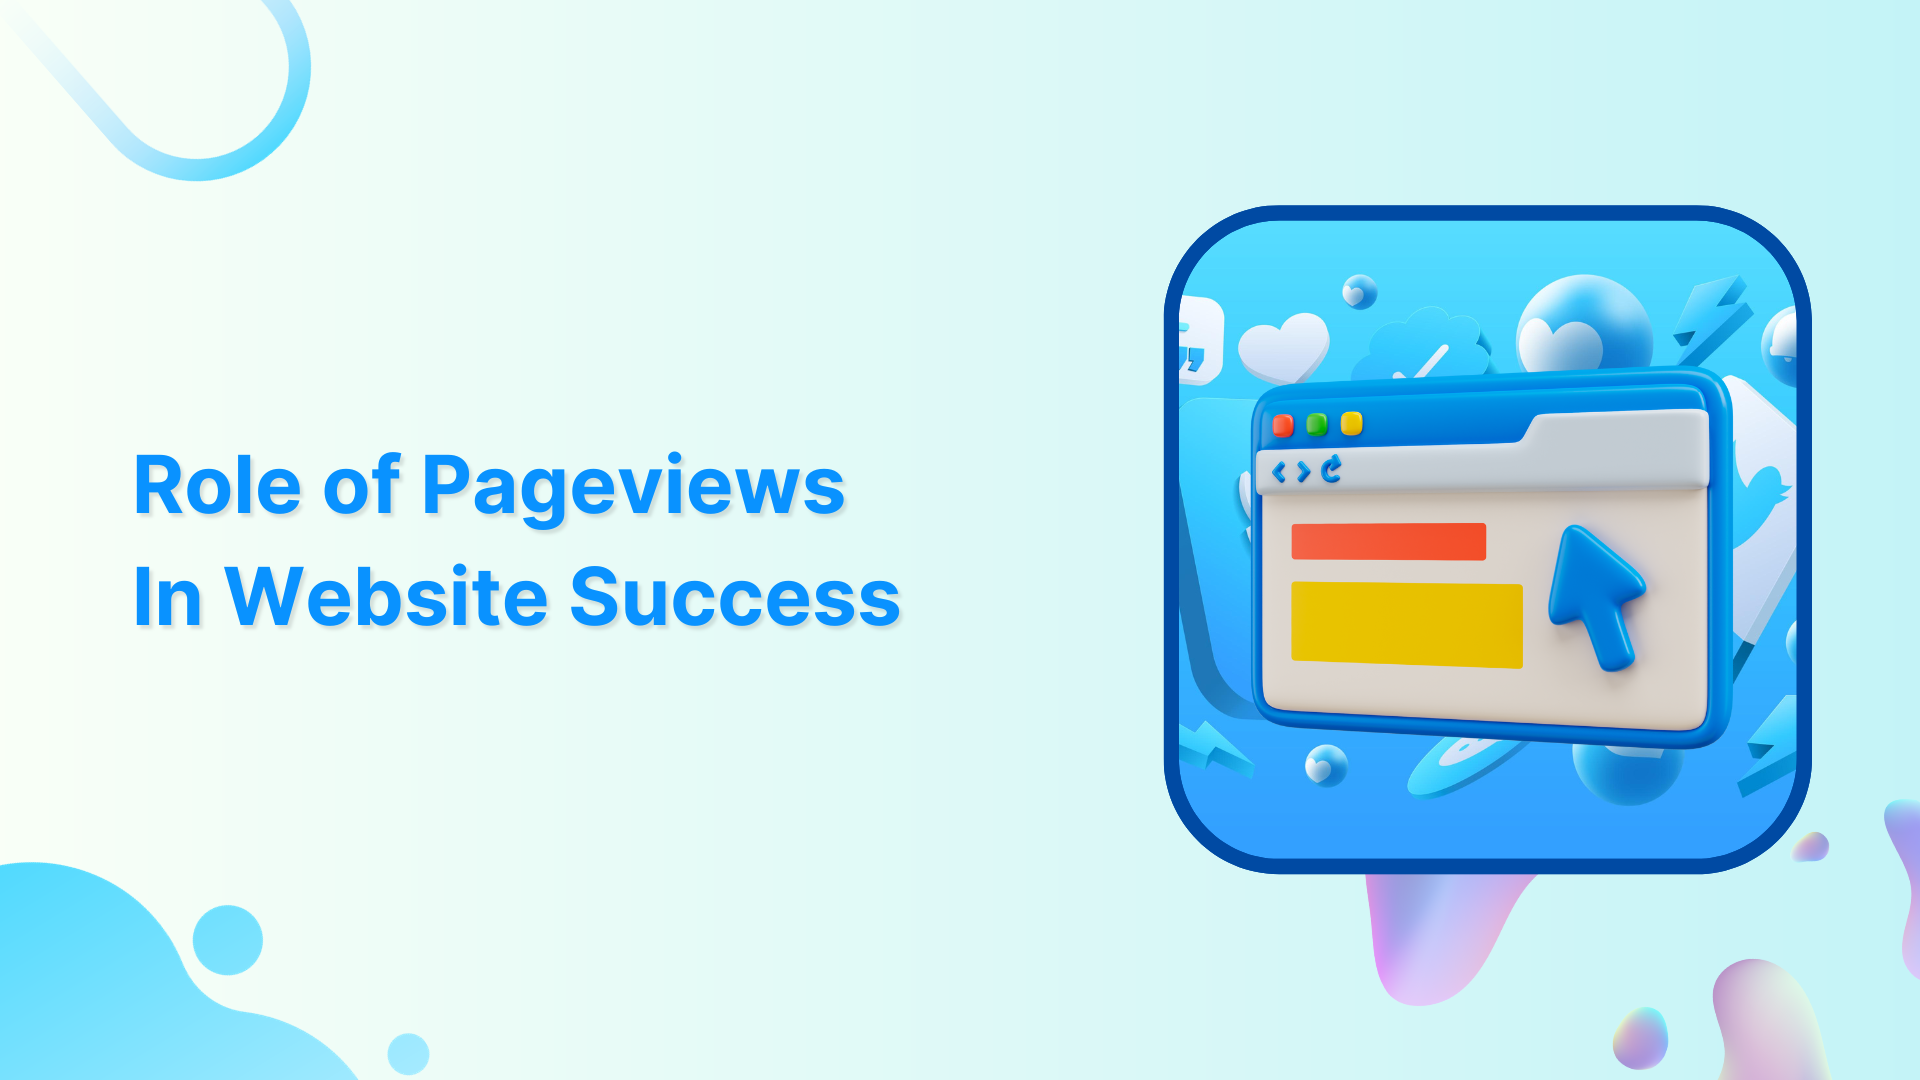 Pageviews &amp; Their Role in Website Success